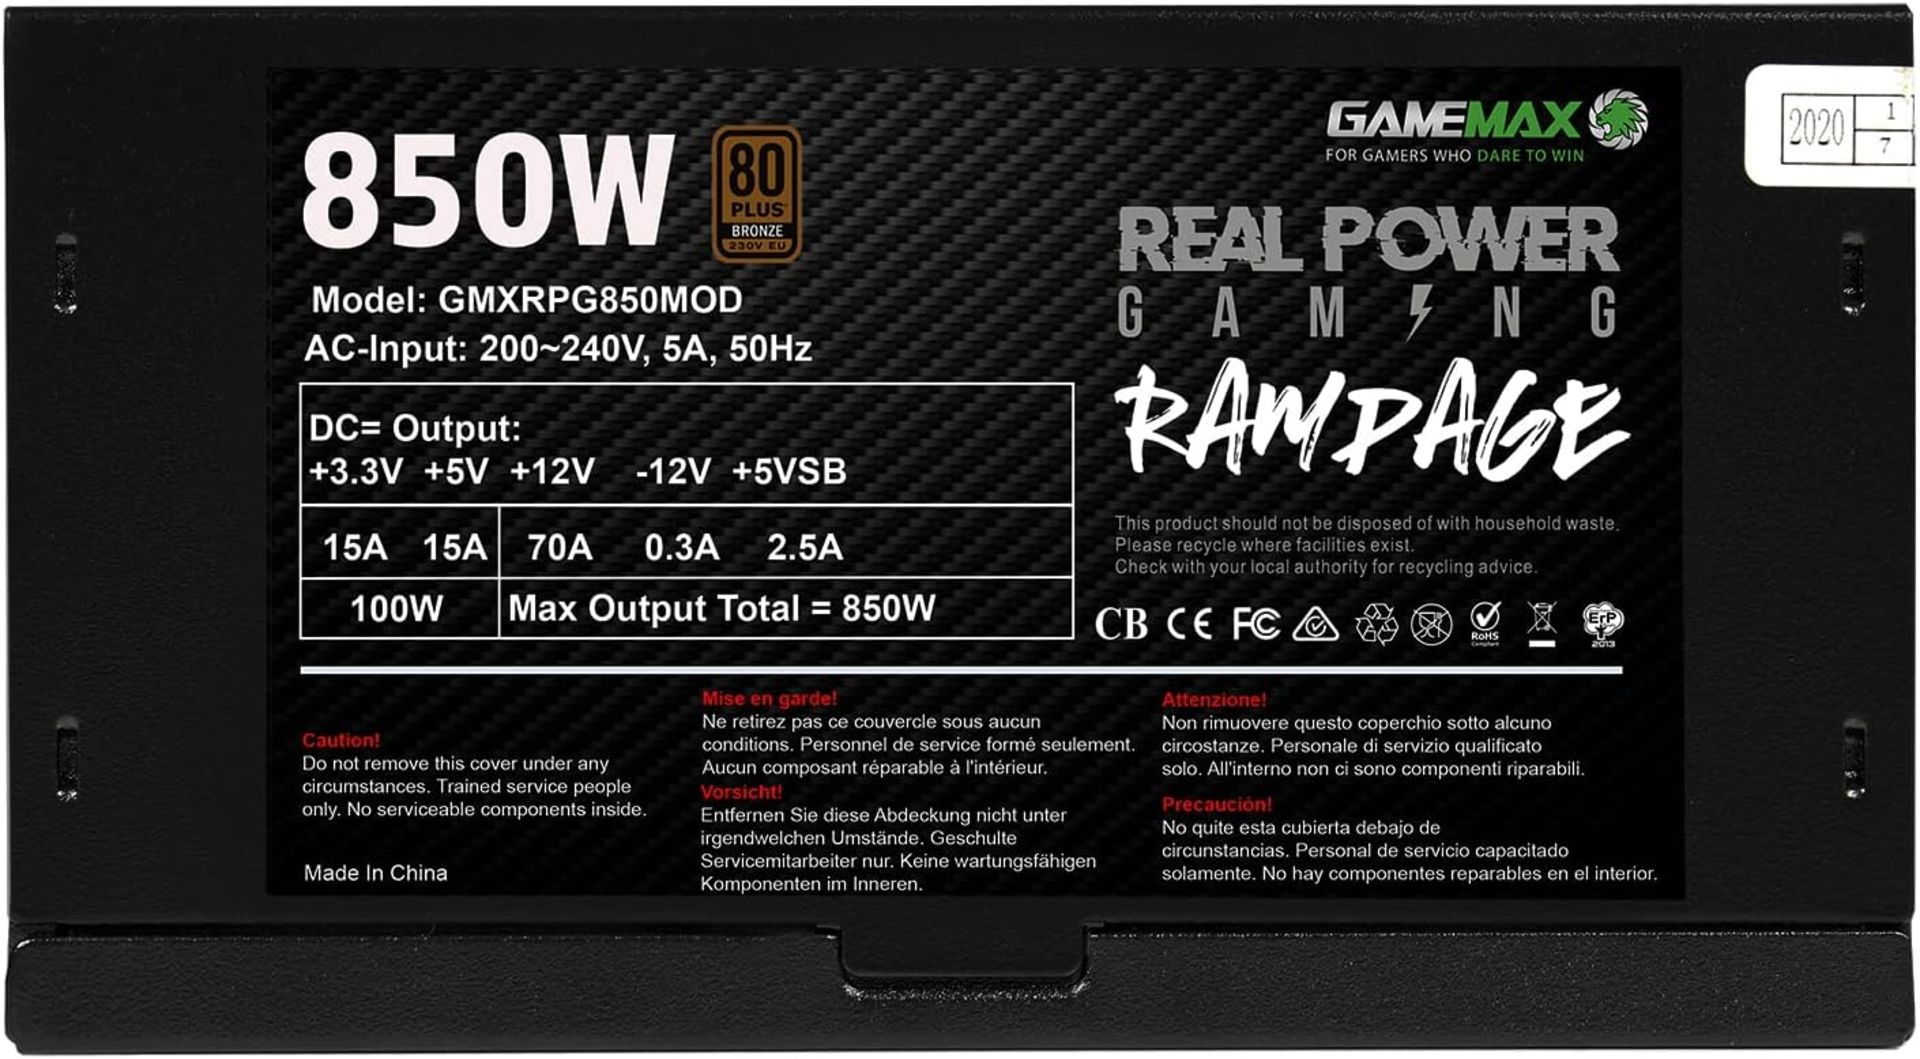 2x NEW & BOXED GAMEMAX Rampage 850w Power Supply. RRP £69.99 EACH. Semi-Modular - The 850W Rampage - Image 11 of 13